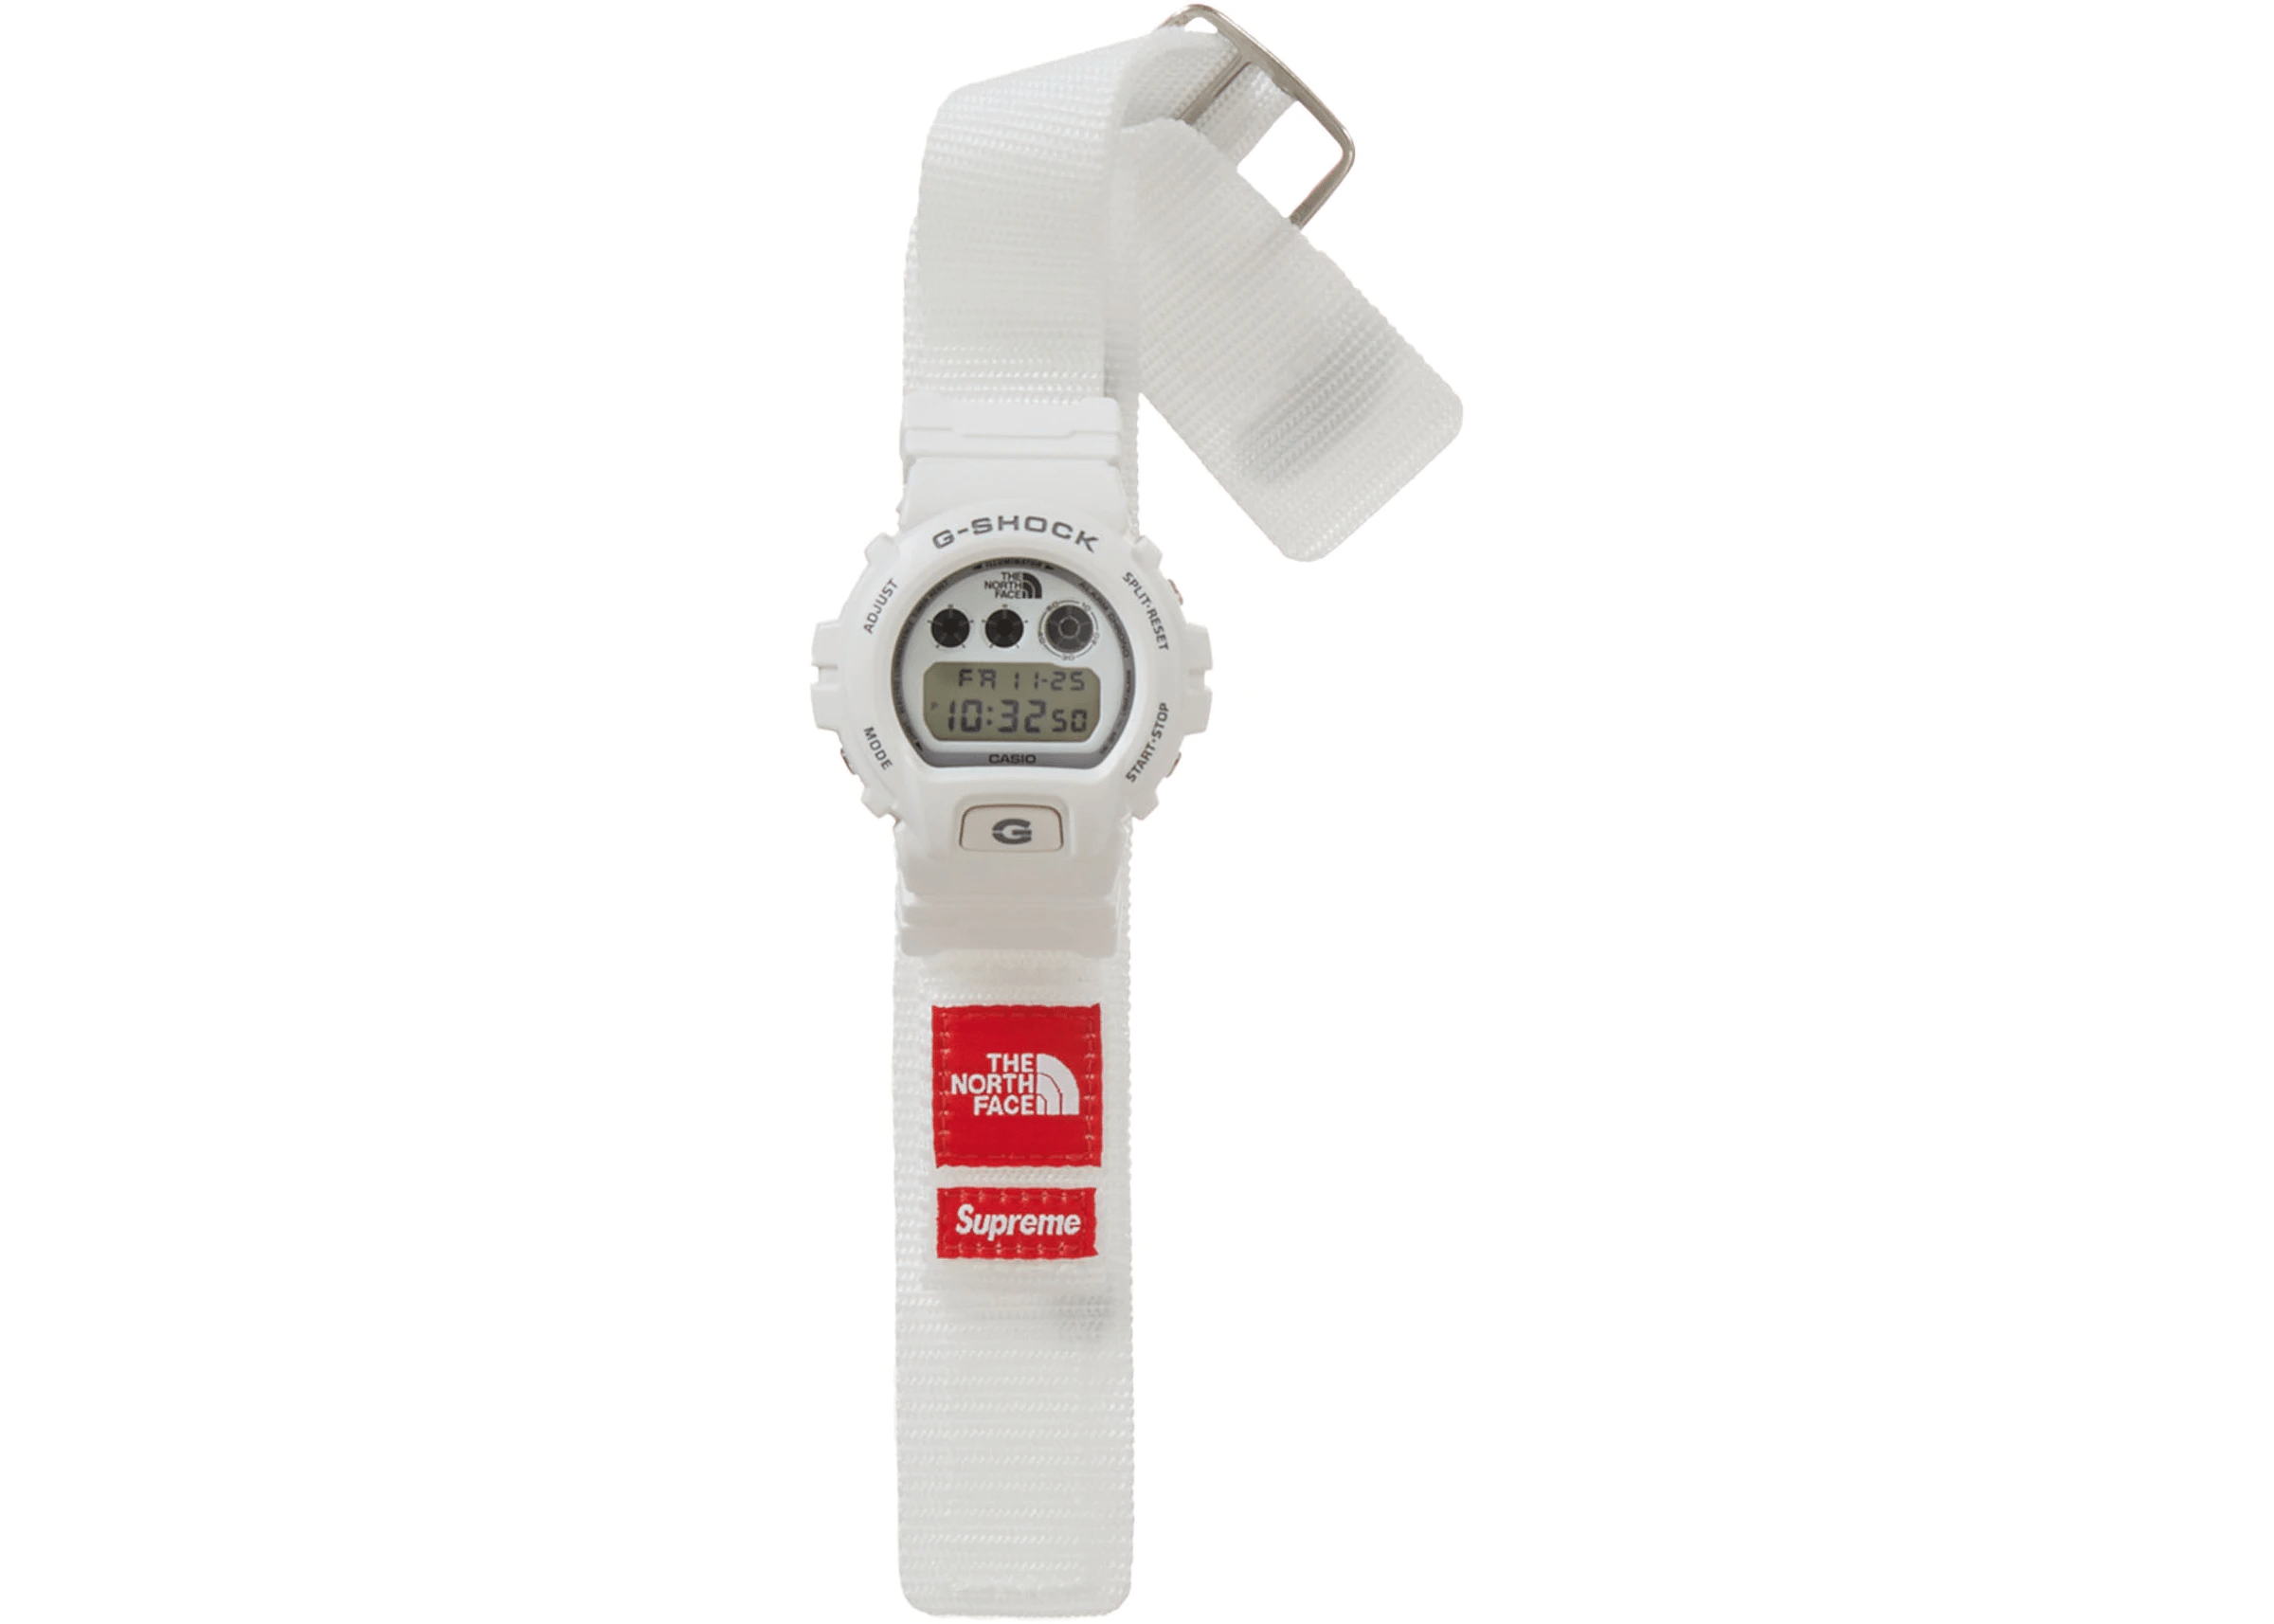 Supreme X The North Face X G-SHOCK Watch - The Back Door